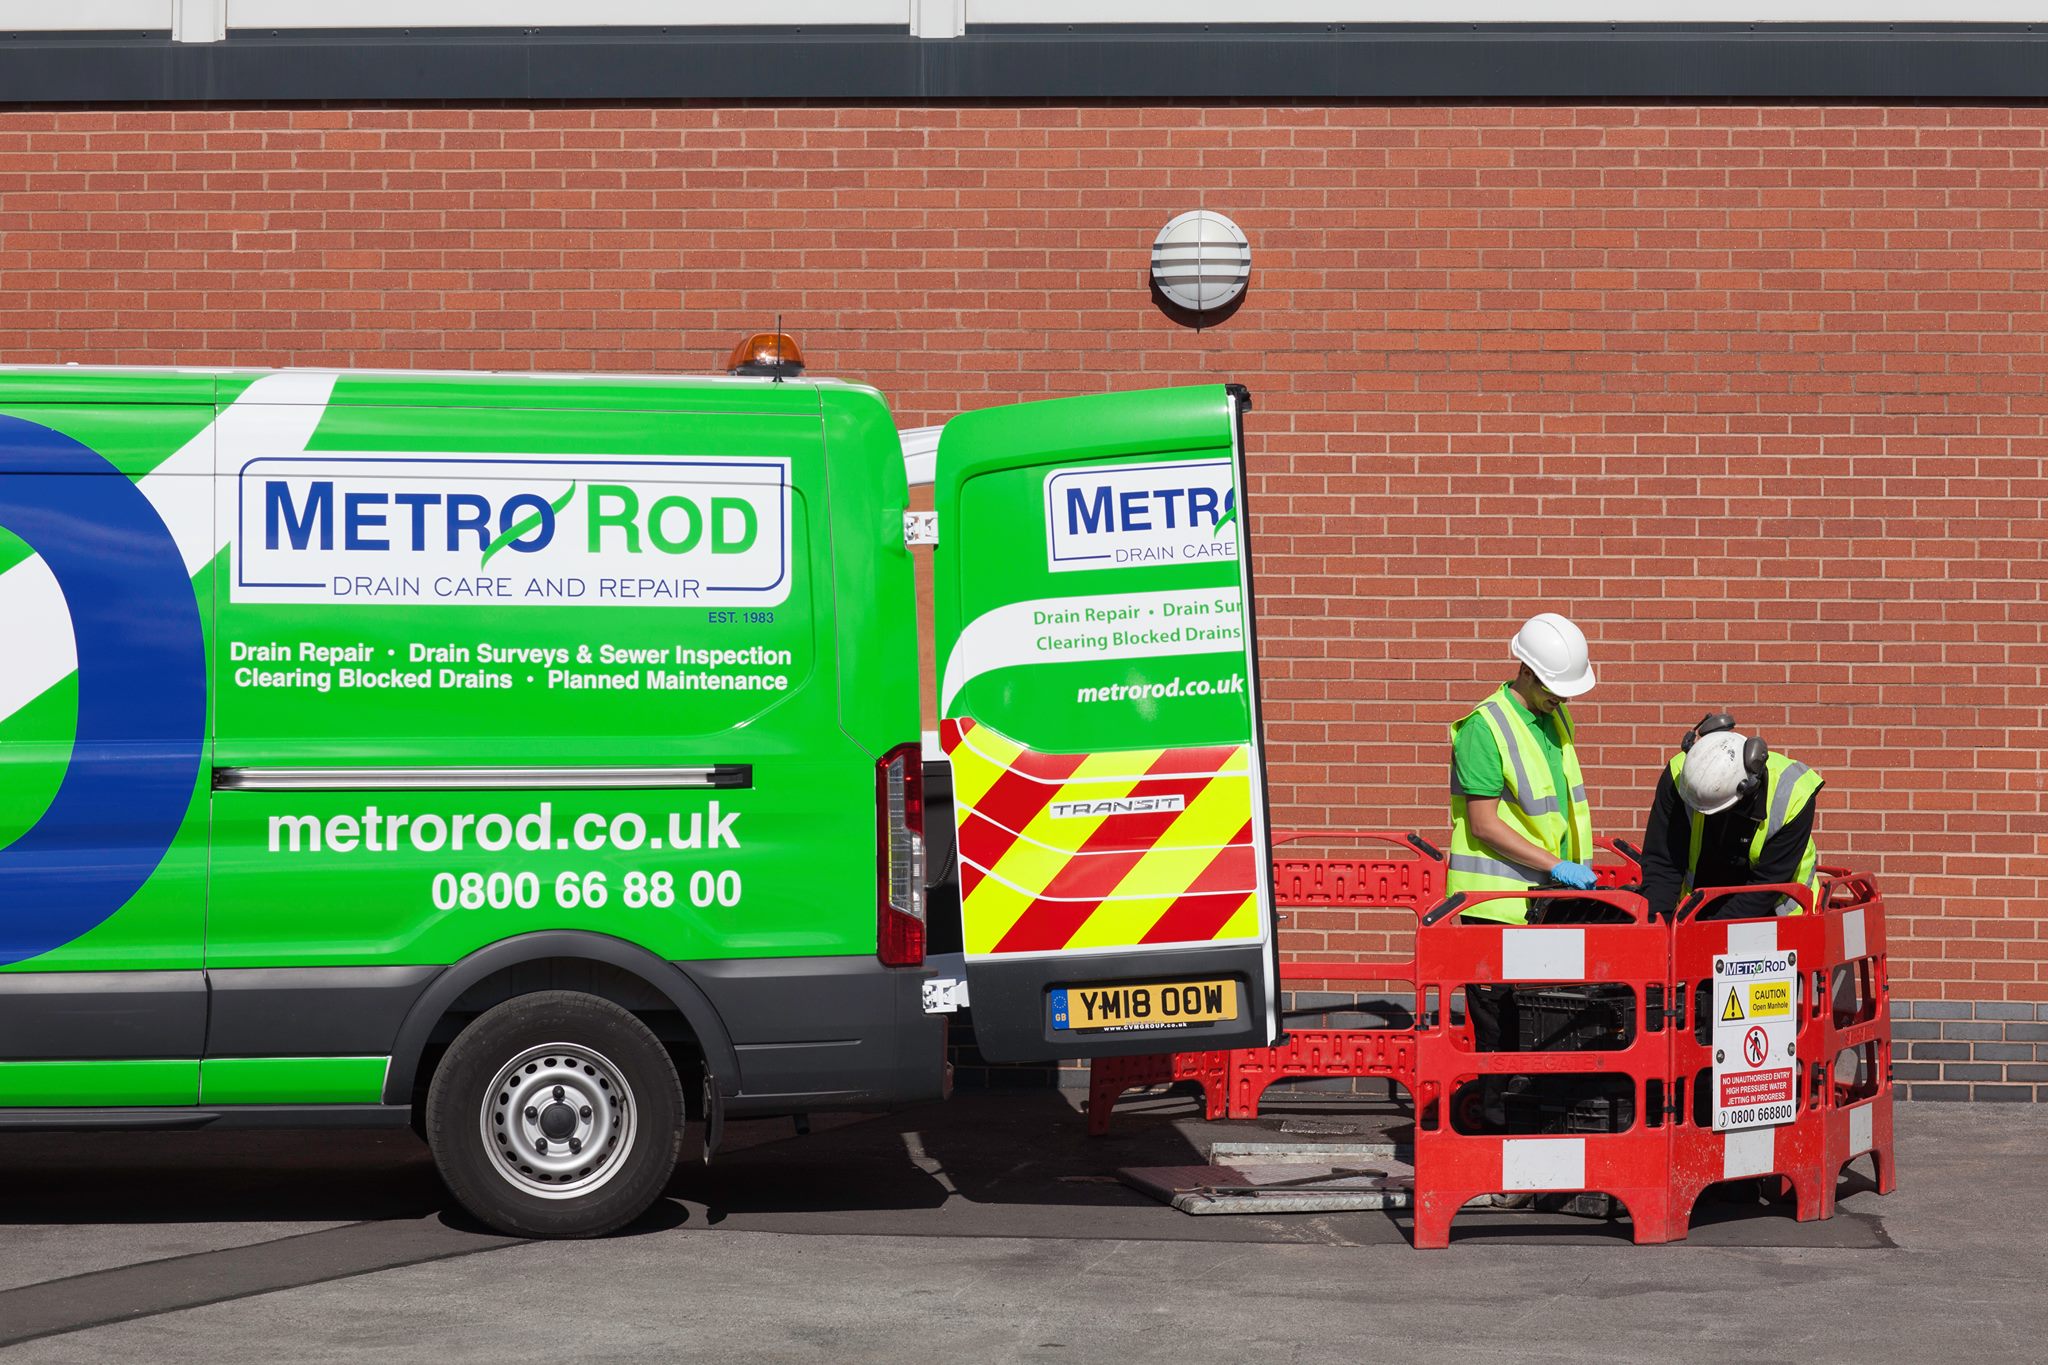 Metro Rod Cumbria – Clearing Blocked Drains in Cumbria, Dumfries & Galloway and Lancashire.